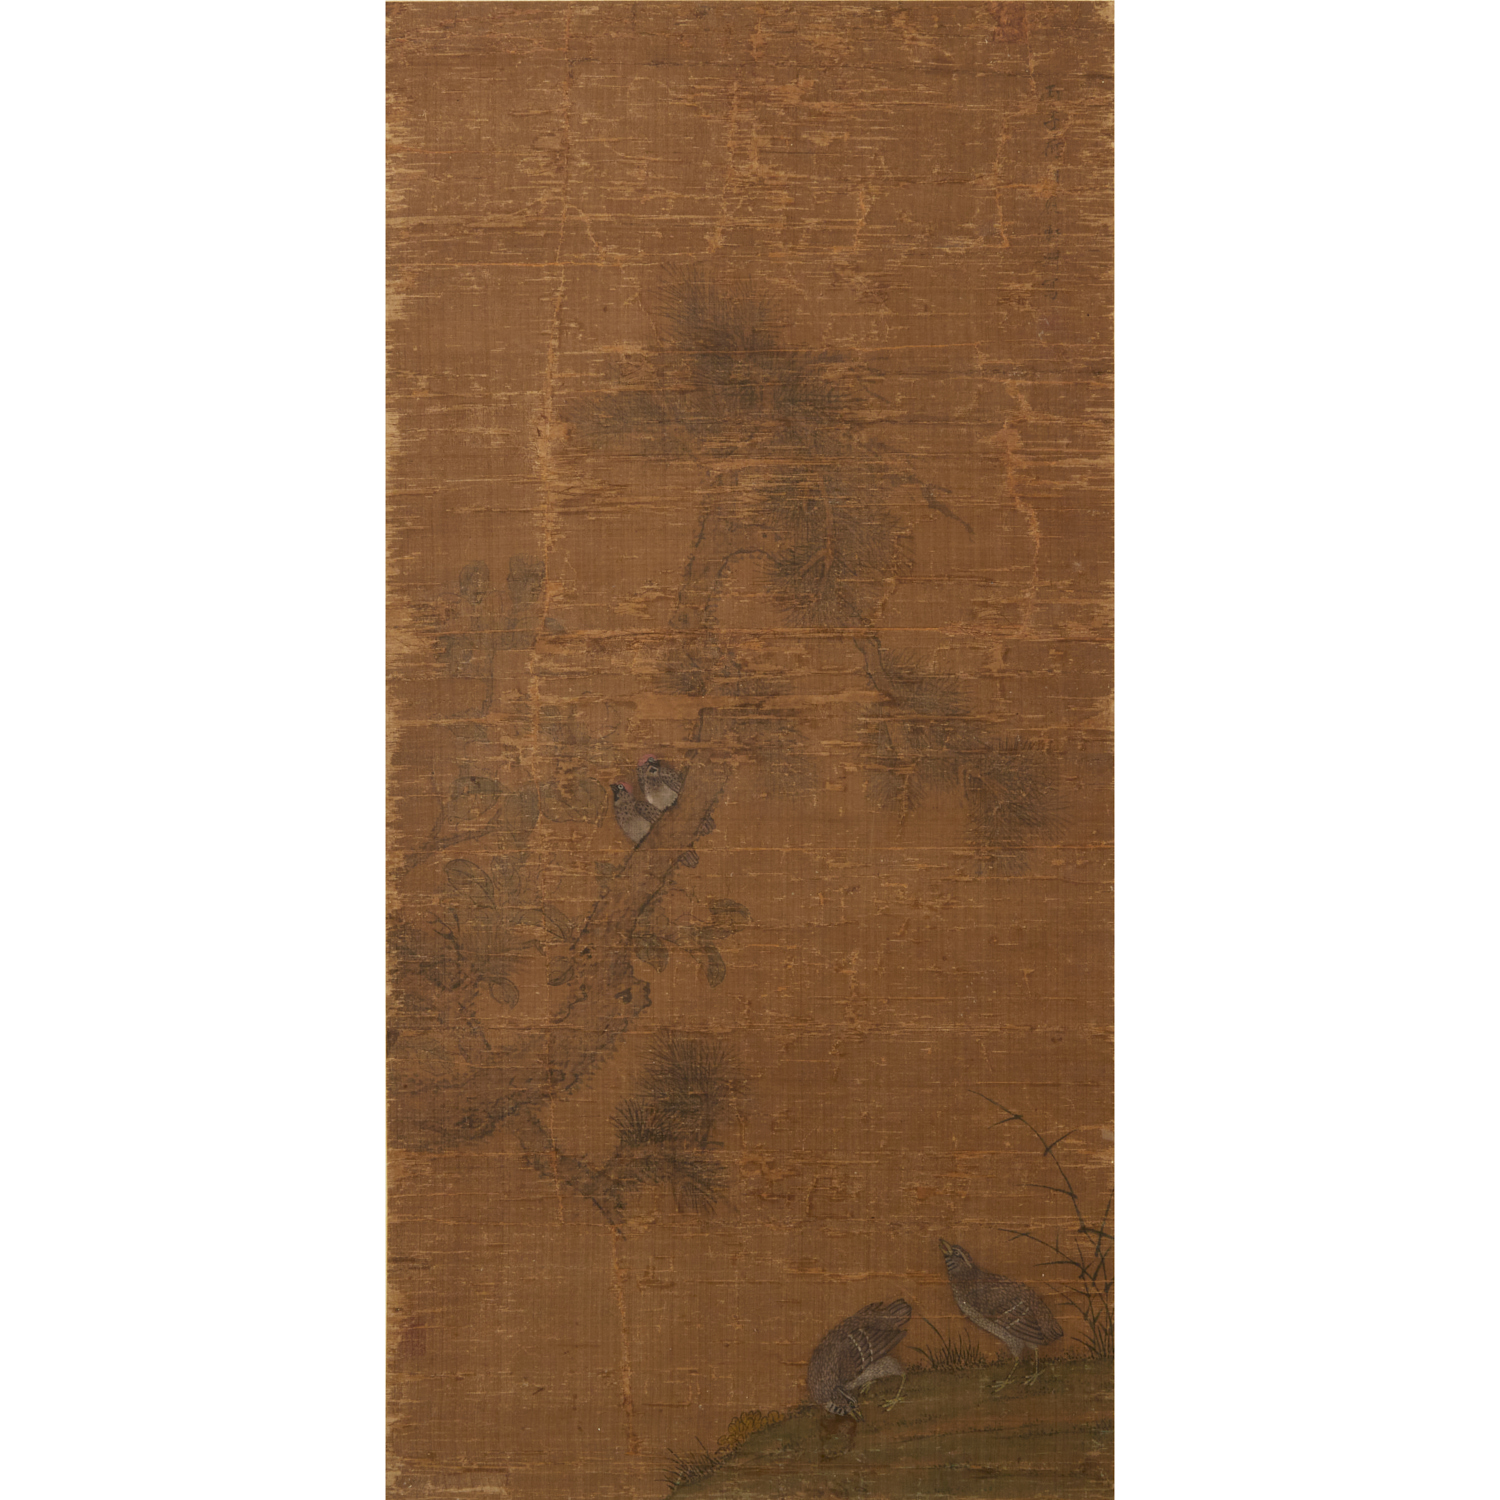 SONG MING SCHOOL PAINTING ON SILK 2faade